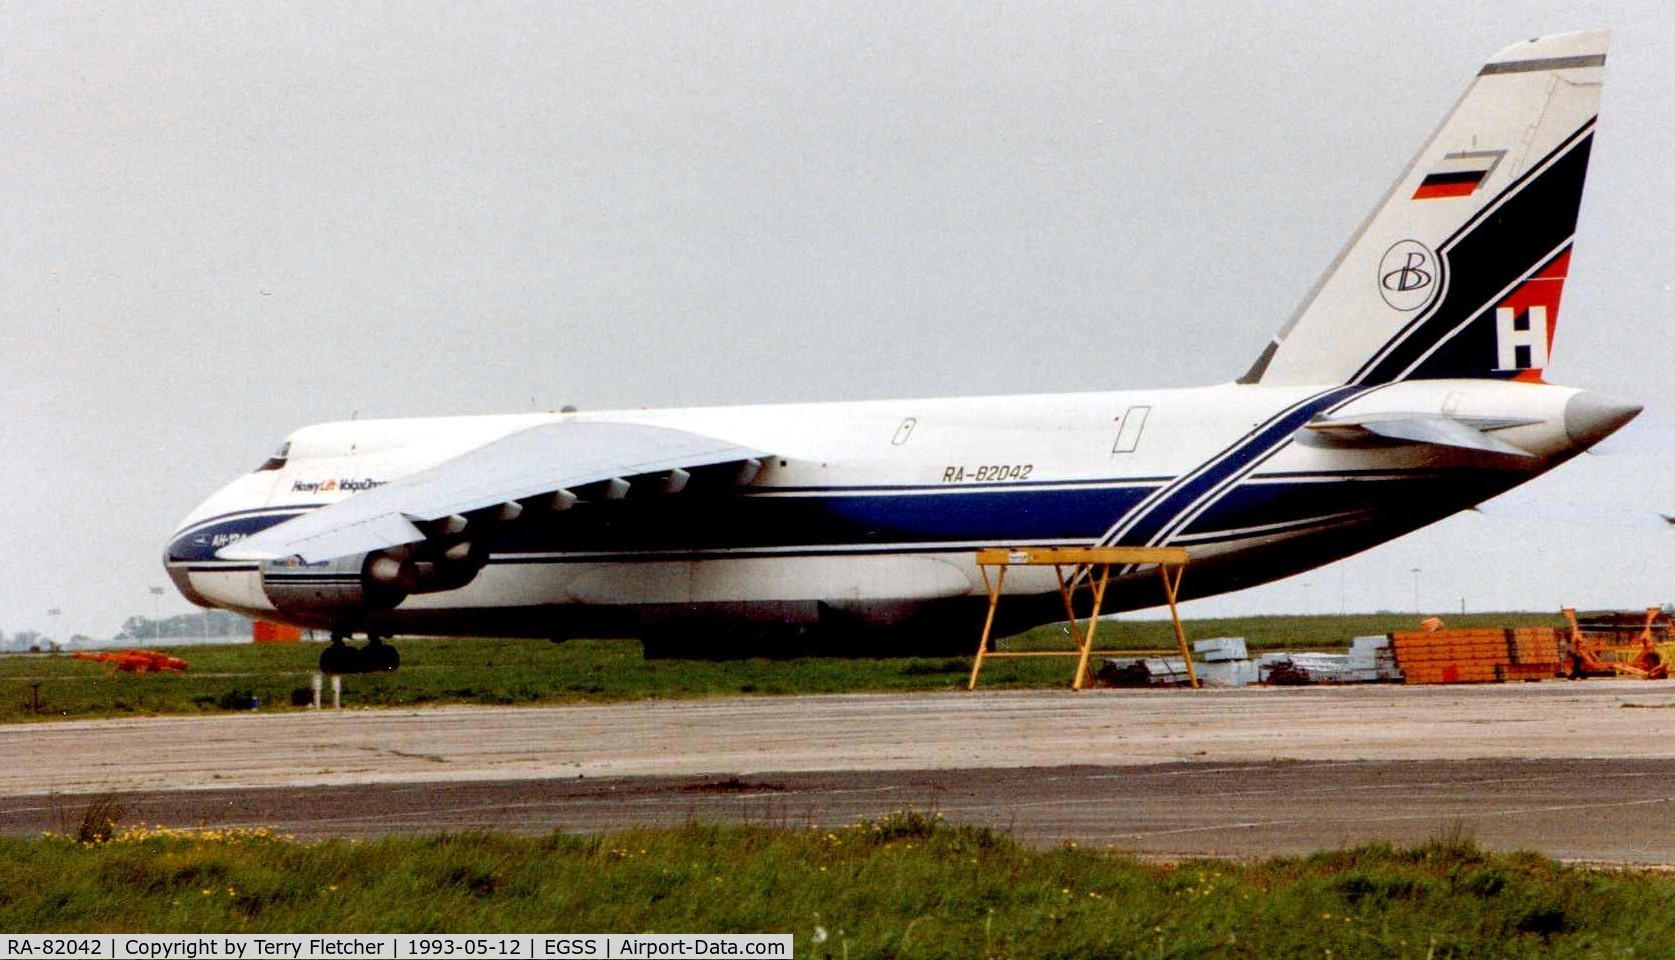 RA-82042, 1991 Antonov An-124-100 Ruslan C/N 9773054055093/0606, An124 seen operating for Heavylift at Stansted in 1993